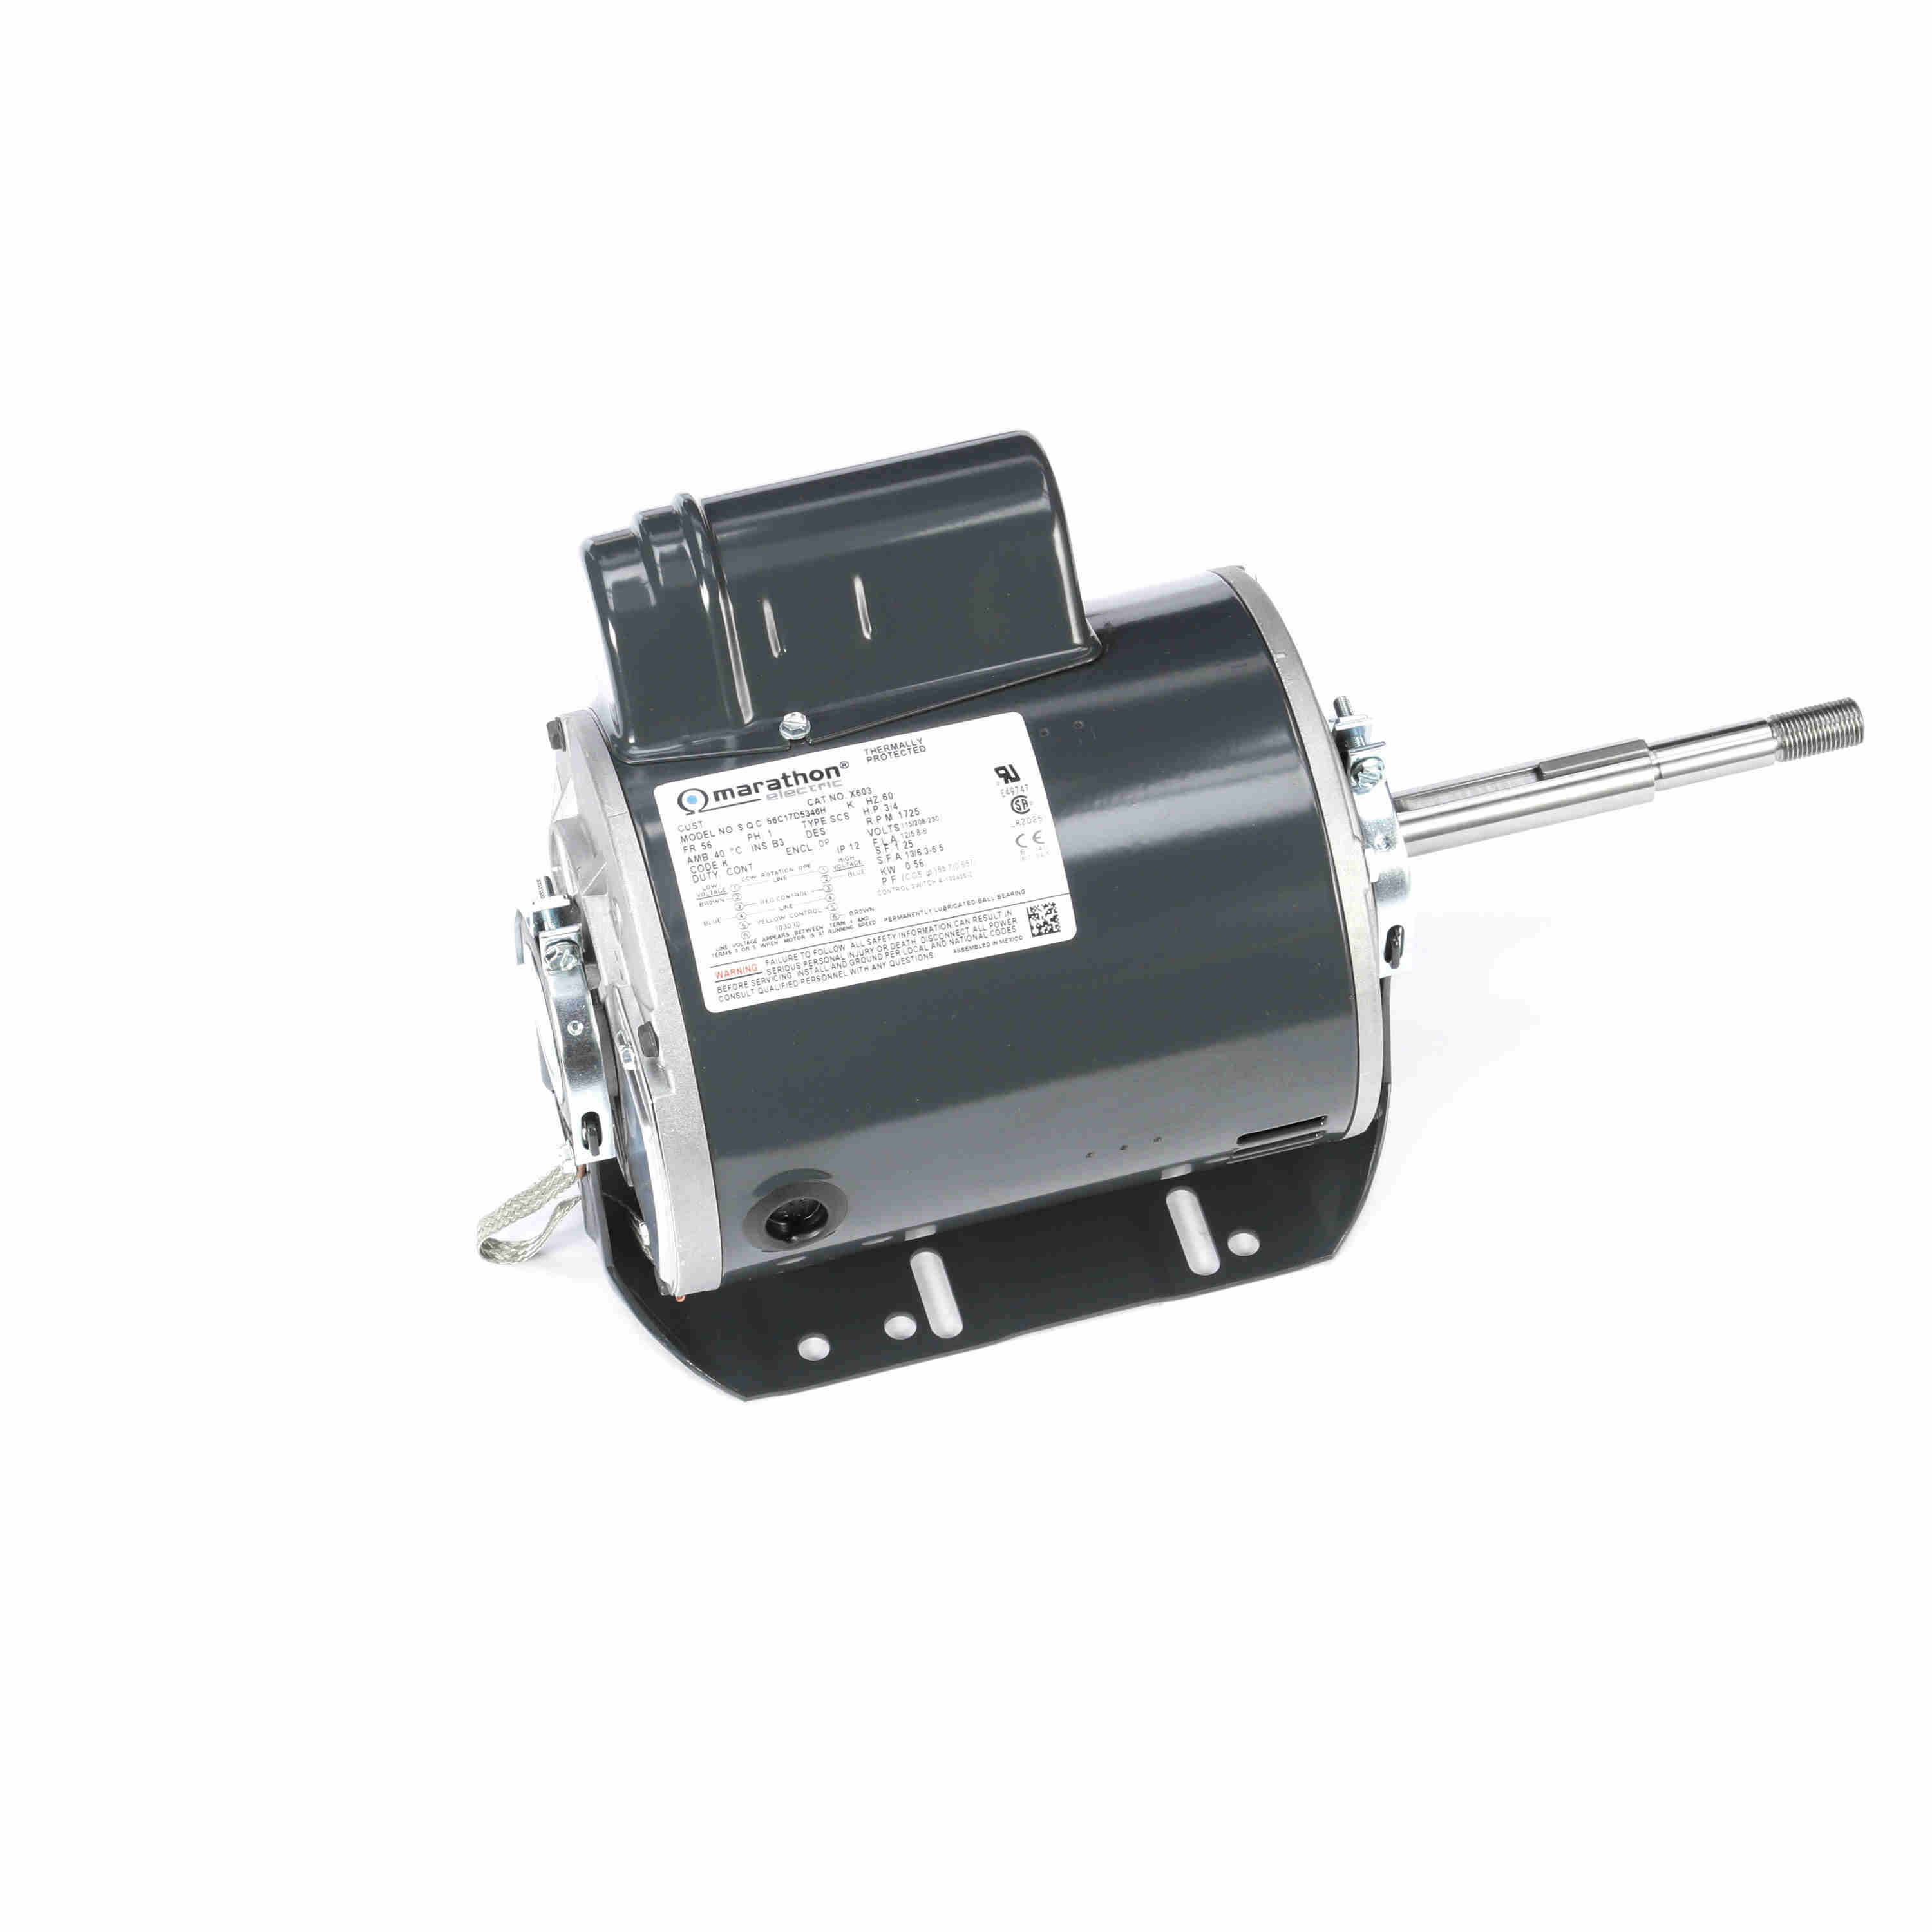 Direct Drive Blower Motor 3/4 HP 1725 rpm 1-phase Dripproof